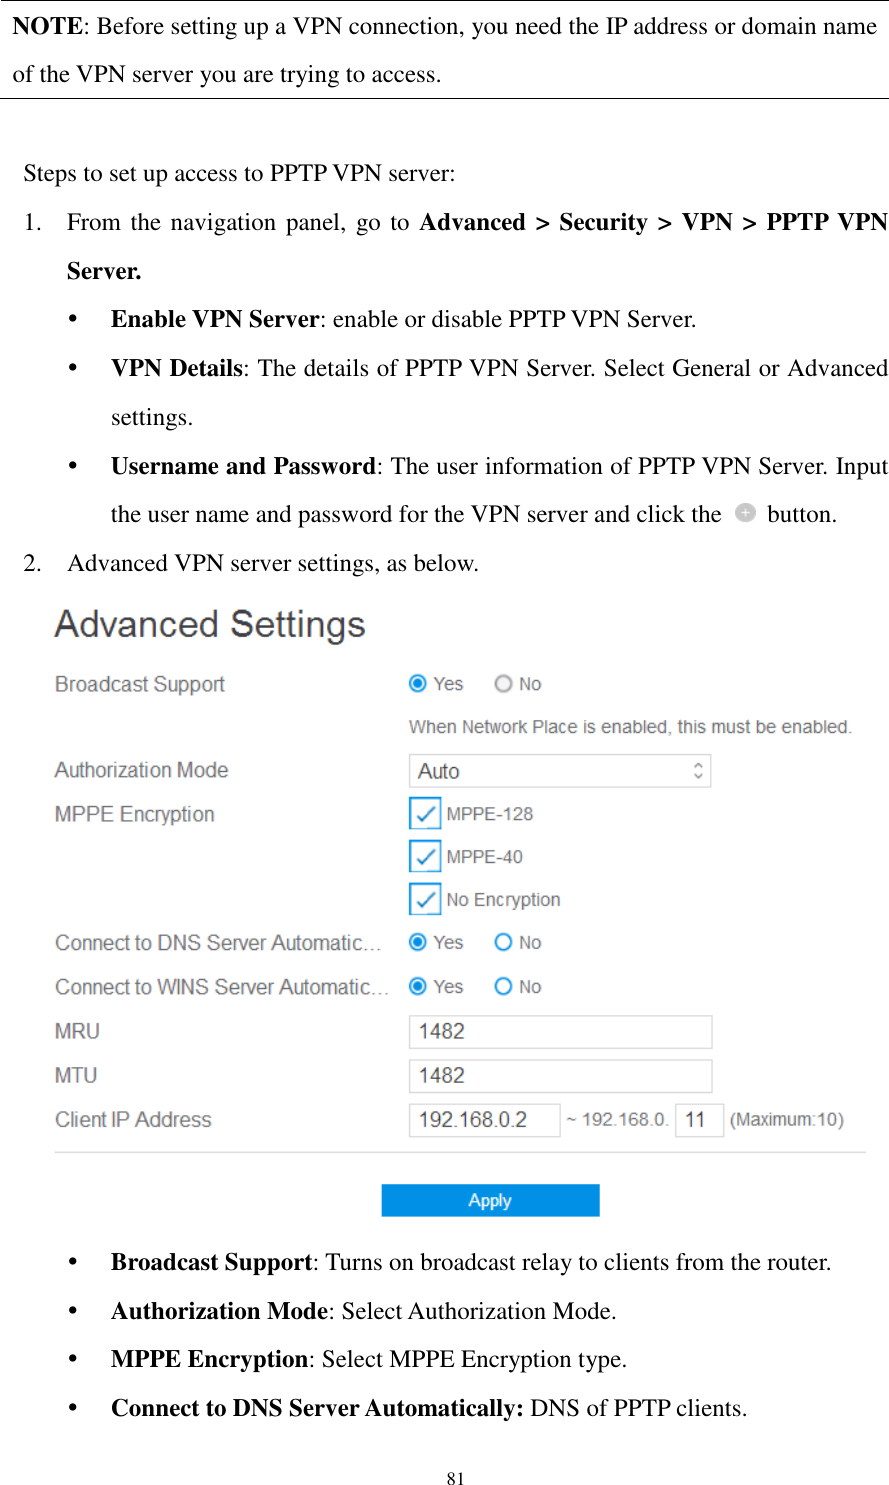  81 NOTE: Before setting up a VPN connection, you need the IP address or domain name of the VPN server you are trying to access.  Steps to set up access to PPTP VPN server:   1. From the navigation panel, go to Advanced &gt; Security &gt; VPN &gt; PPTP VPN Server.  Enable VPN Server: enable or disable PPTP VPN Server.  VPN Details: The details of PPTP VPN Server. Select General or Advanced settings.  Username and Password: The user information of PPTP VPN Server. Input the user name and password for the VPN server and click the    button. 2. Advanced VPN server settings, as below.   Broadcast Support: Turns on broadcast relay to clients from the router.  Authorization Mode: Select Authorization Mode.  MPPE Encryption: Select MPPE Encryption type.  Connect to DNS Server Automatically: DNS of PPTP clients. 